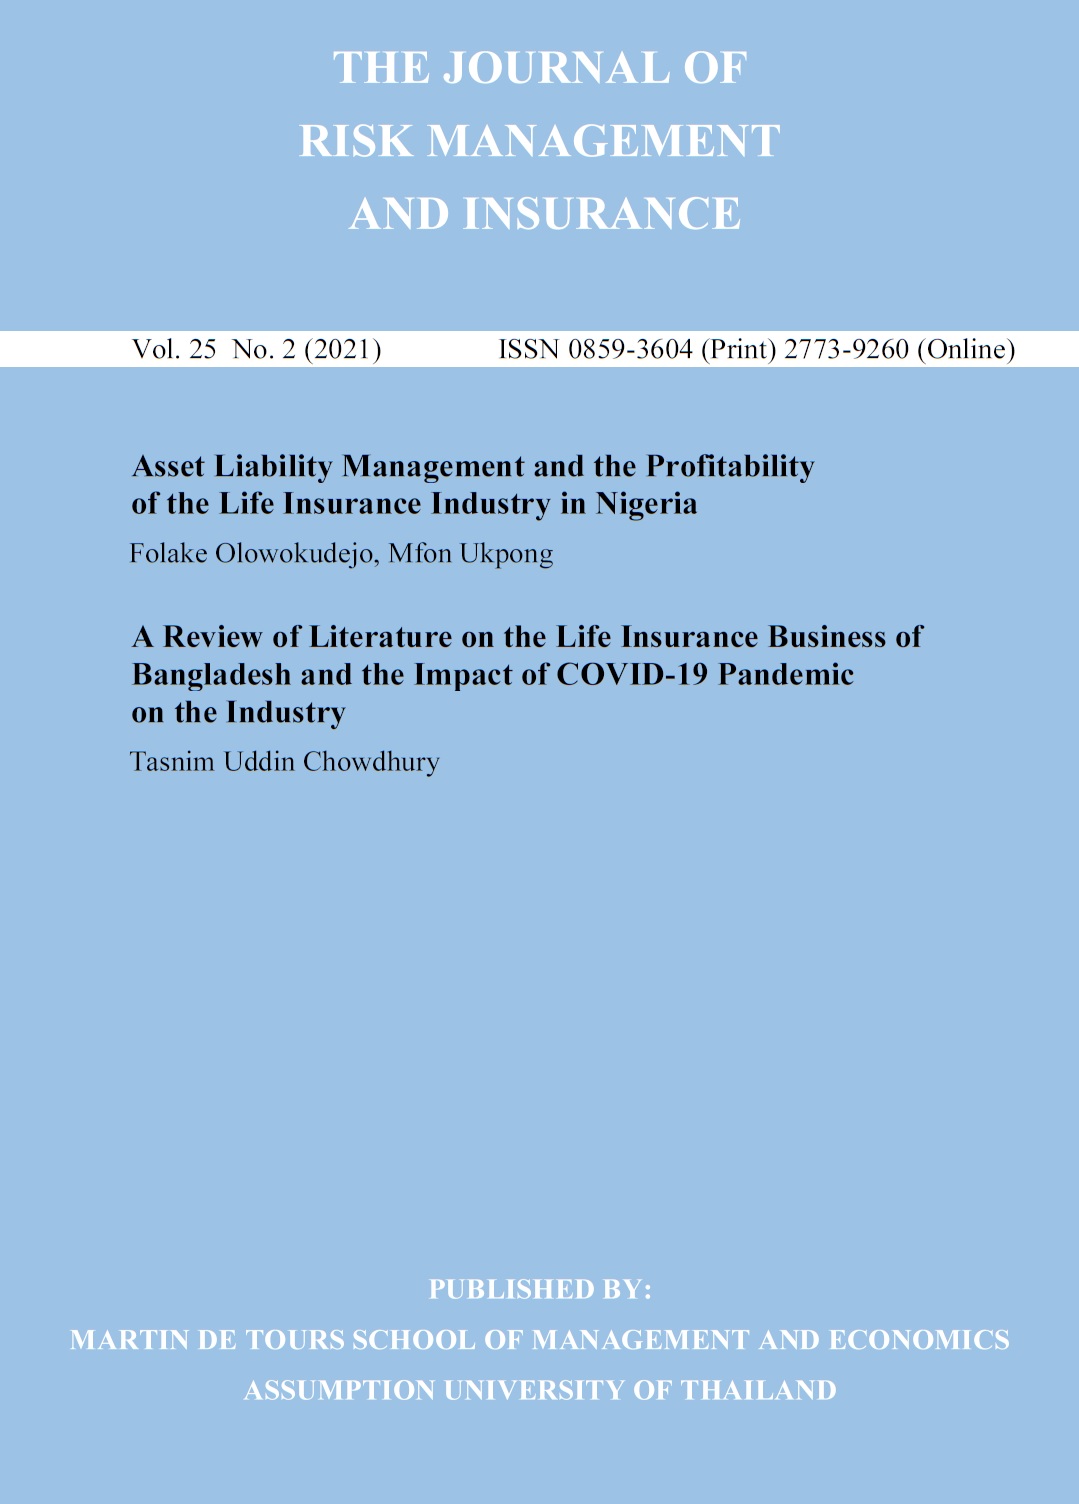 					View Vol. 25 No. 2 (2021): The Journal of Risk Management and Insurance
				